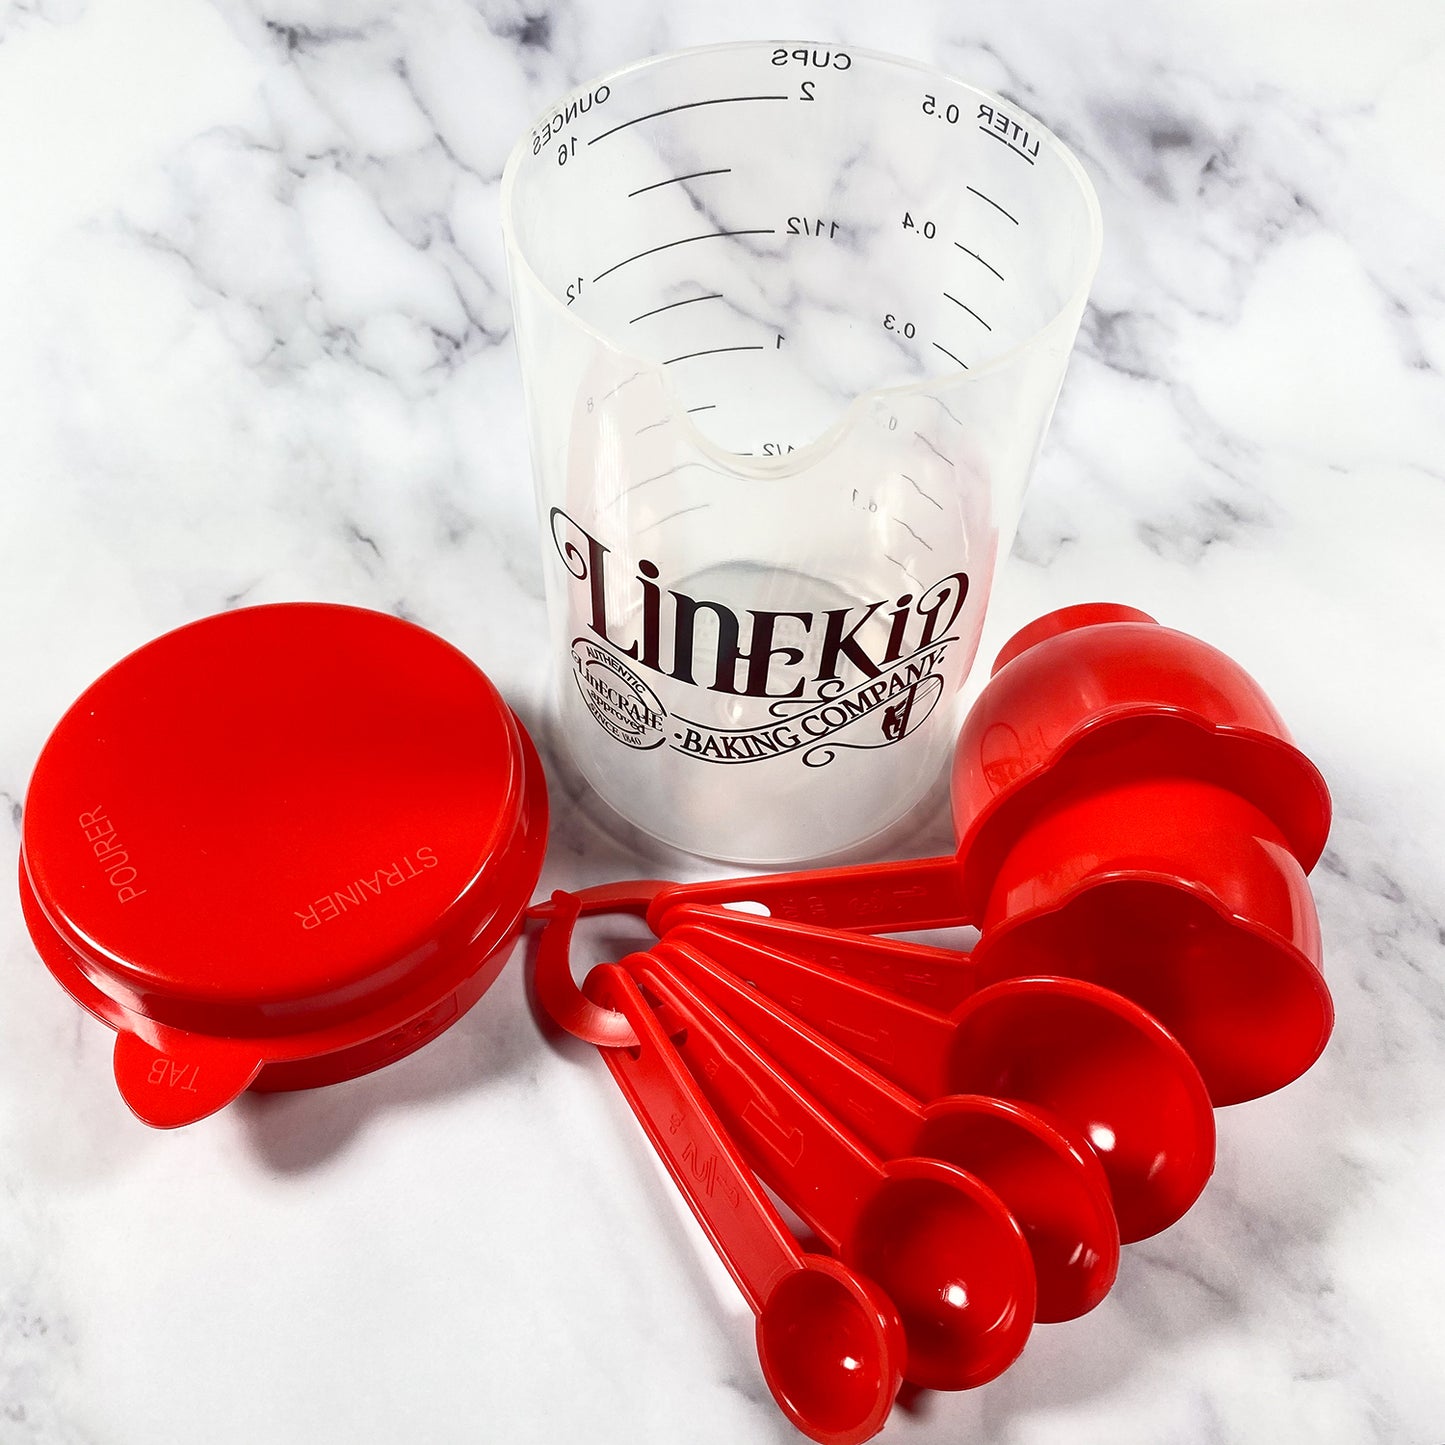 LineKid Baking Company measuring cup and spoons